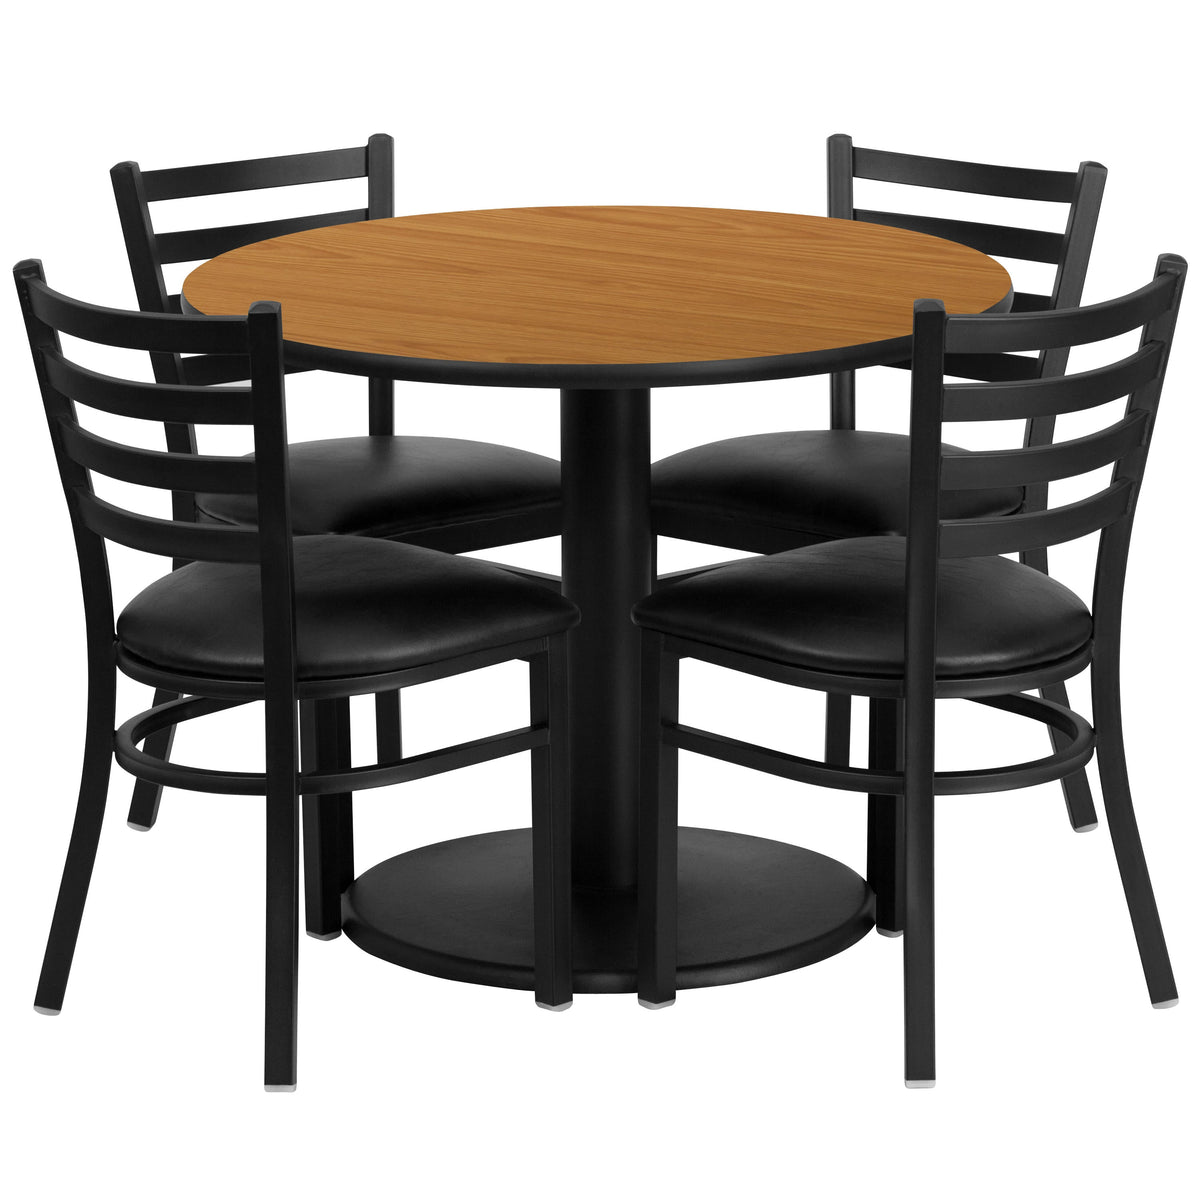 Natural Top/Black Vinyl Seat |#| 36inch Round Natural Laminate Table with Round Base and 4 Ladder Back Metal Chairs